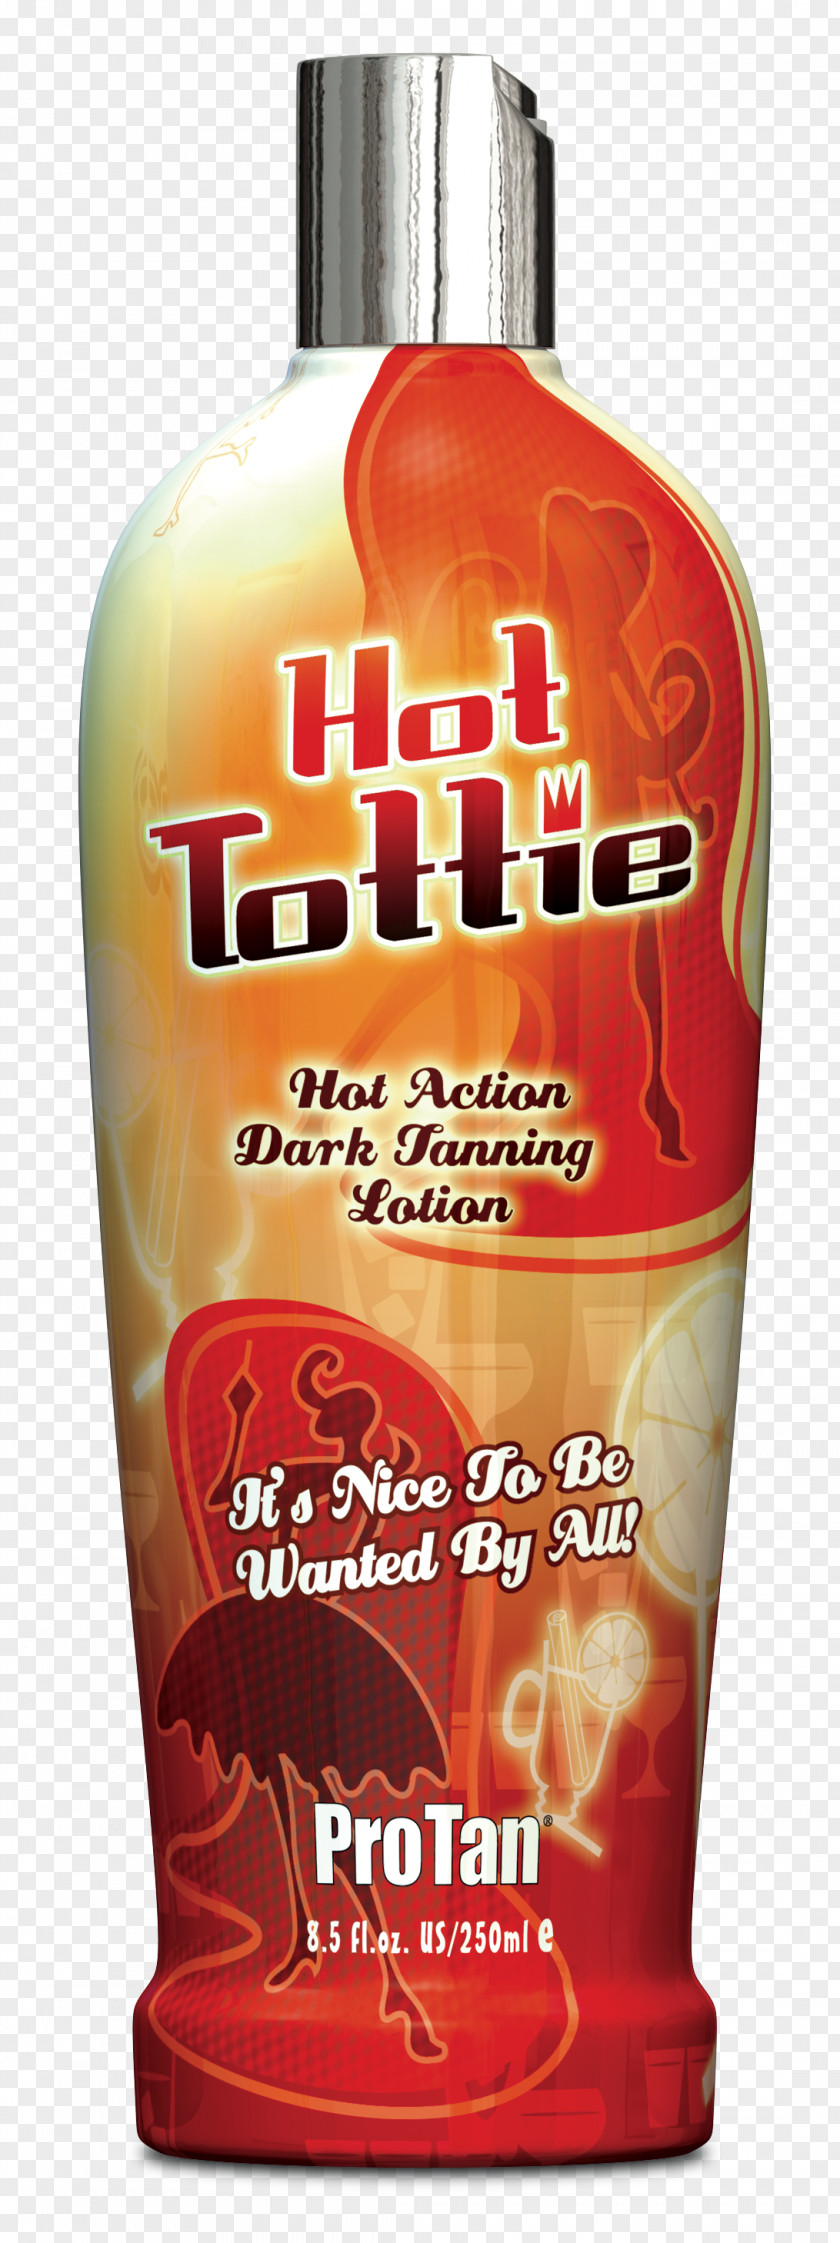 Lotion Bottle Indoor Tanning Sun Sunless PNG